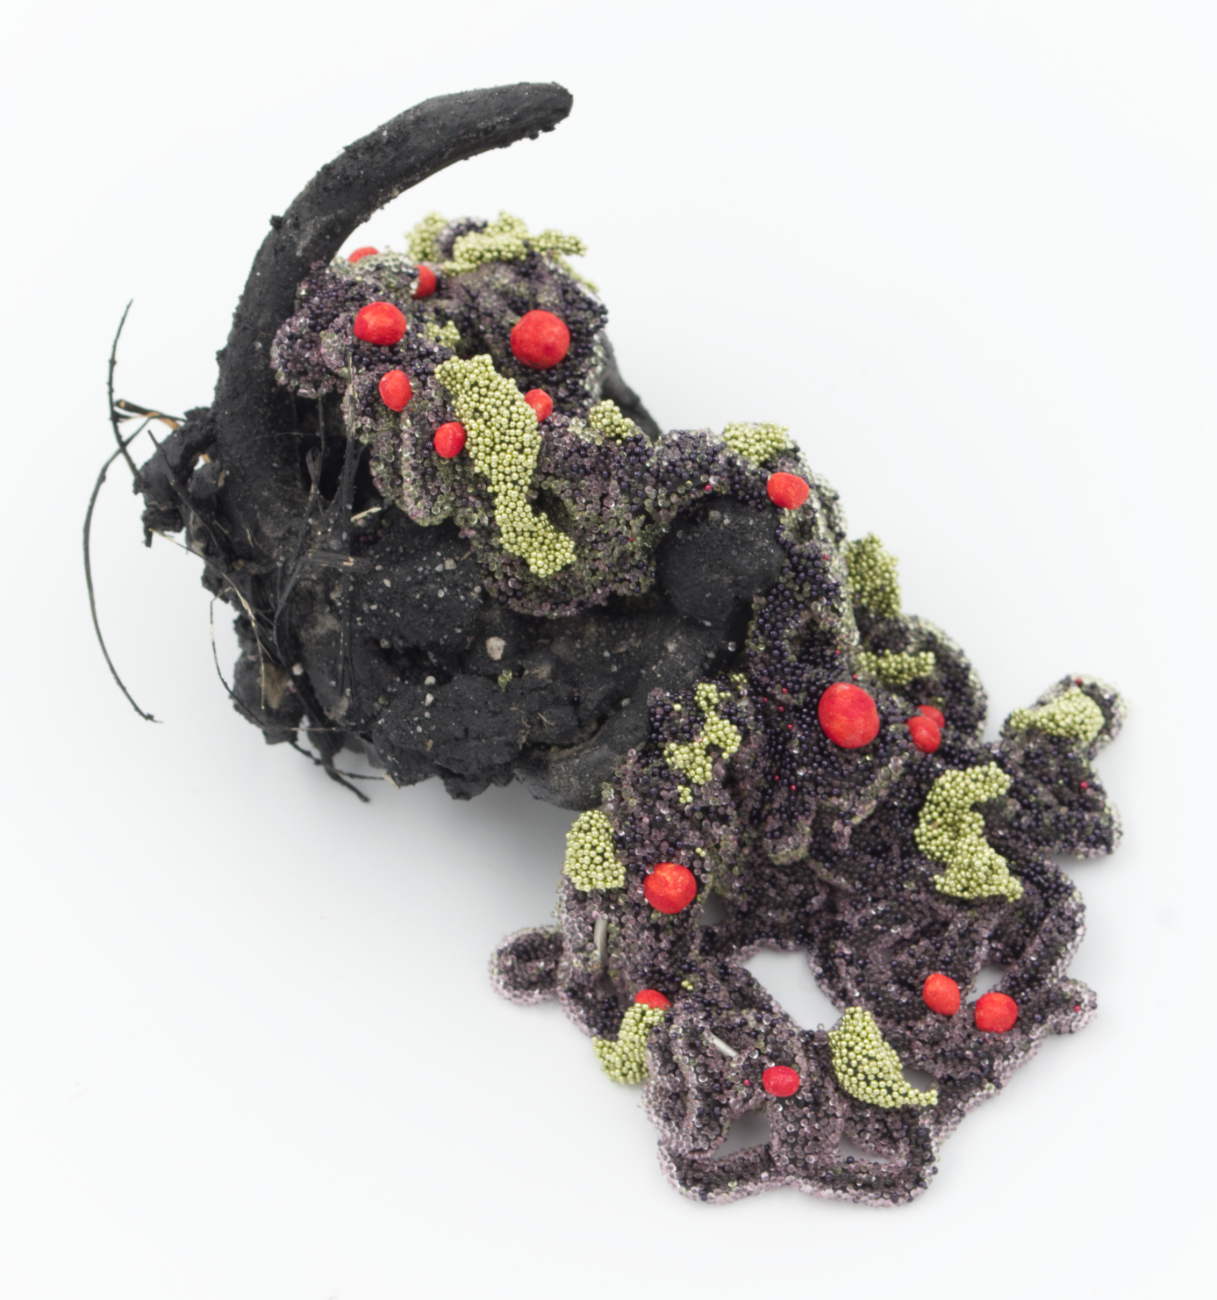 Devious Frequency 3, 2022: silicone, stoneware, air-dry clay, glass, dirt, rocks, grass, pva, acrylic paint, watercolor, stainless steel wire, 4 inches x 3 inches x 2 inches